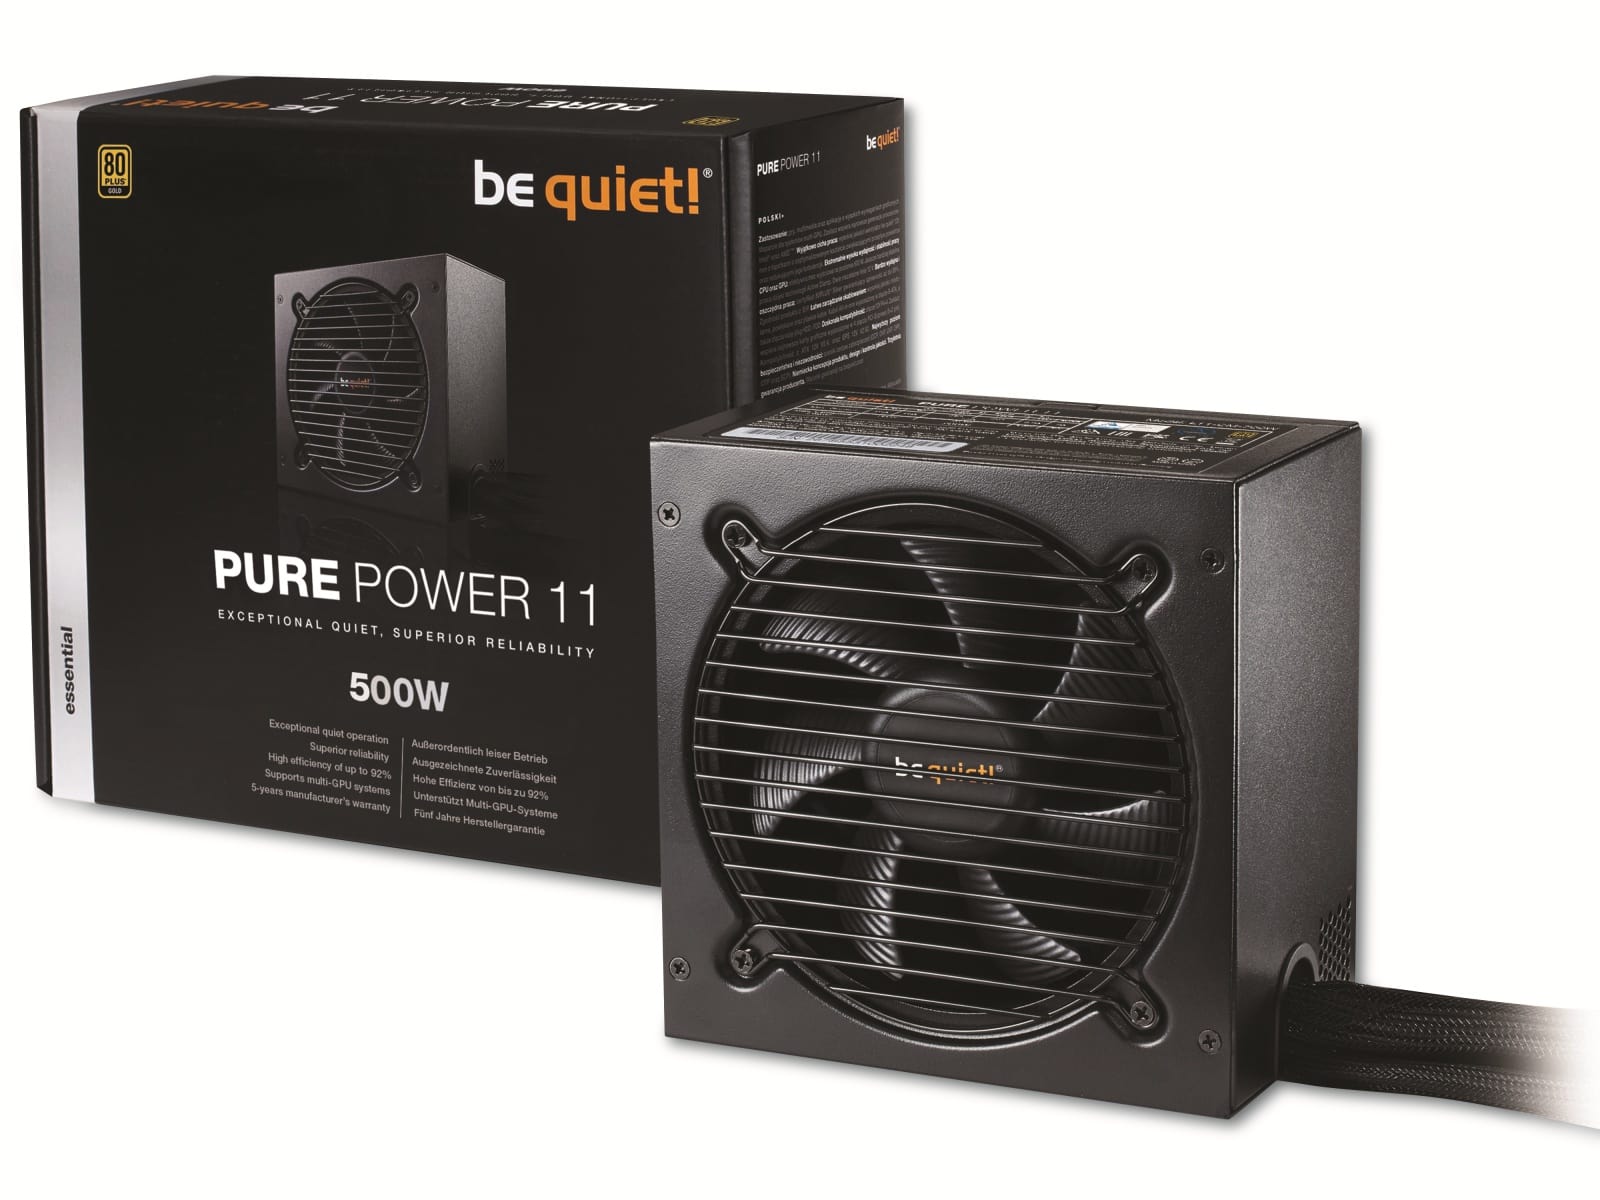 BE QUIET! PC-Netzteil Pure Power 11, 500W, 80+ Gold